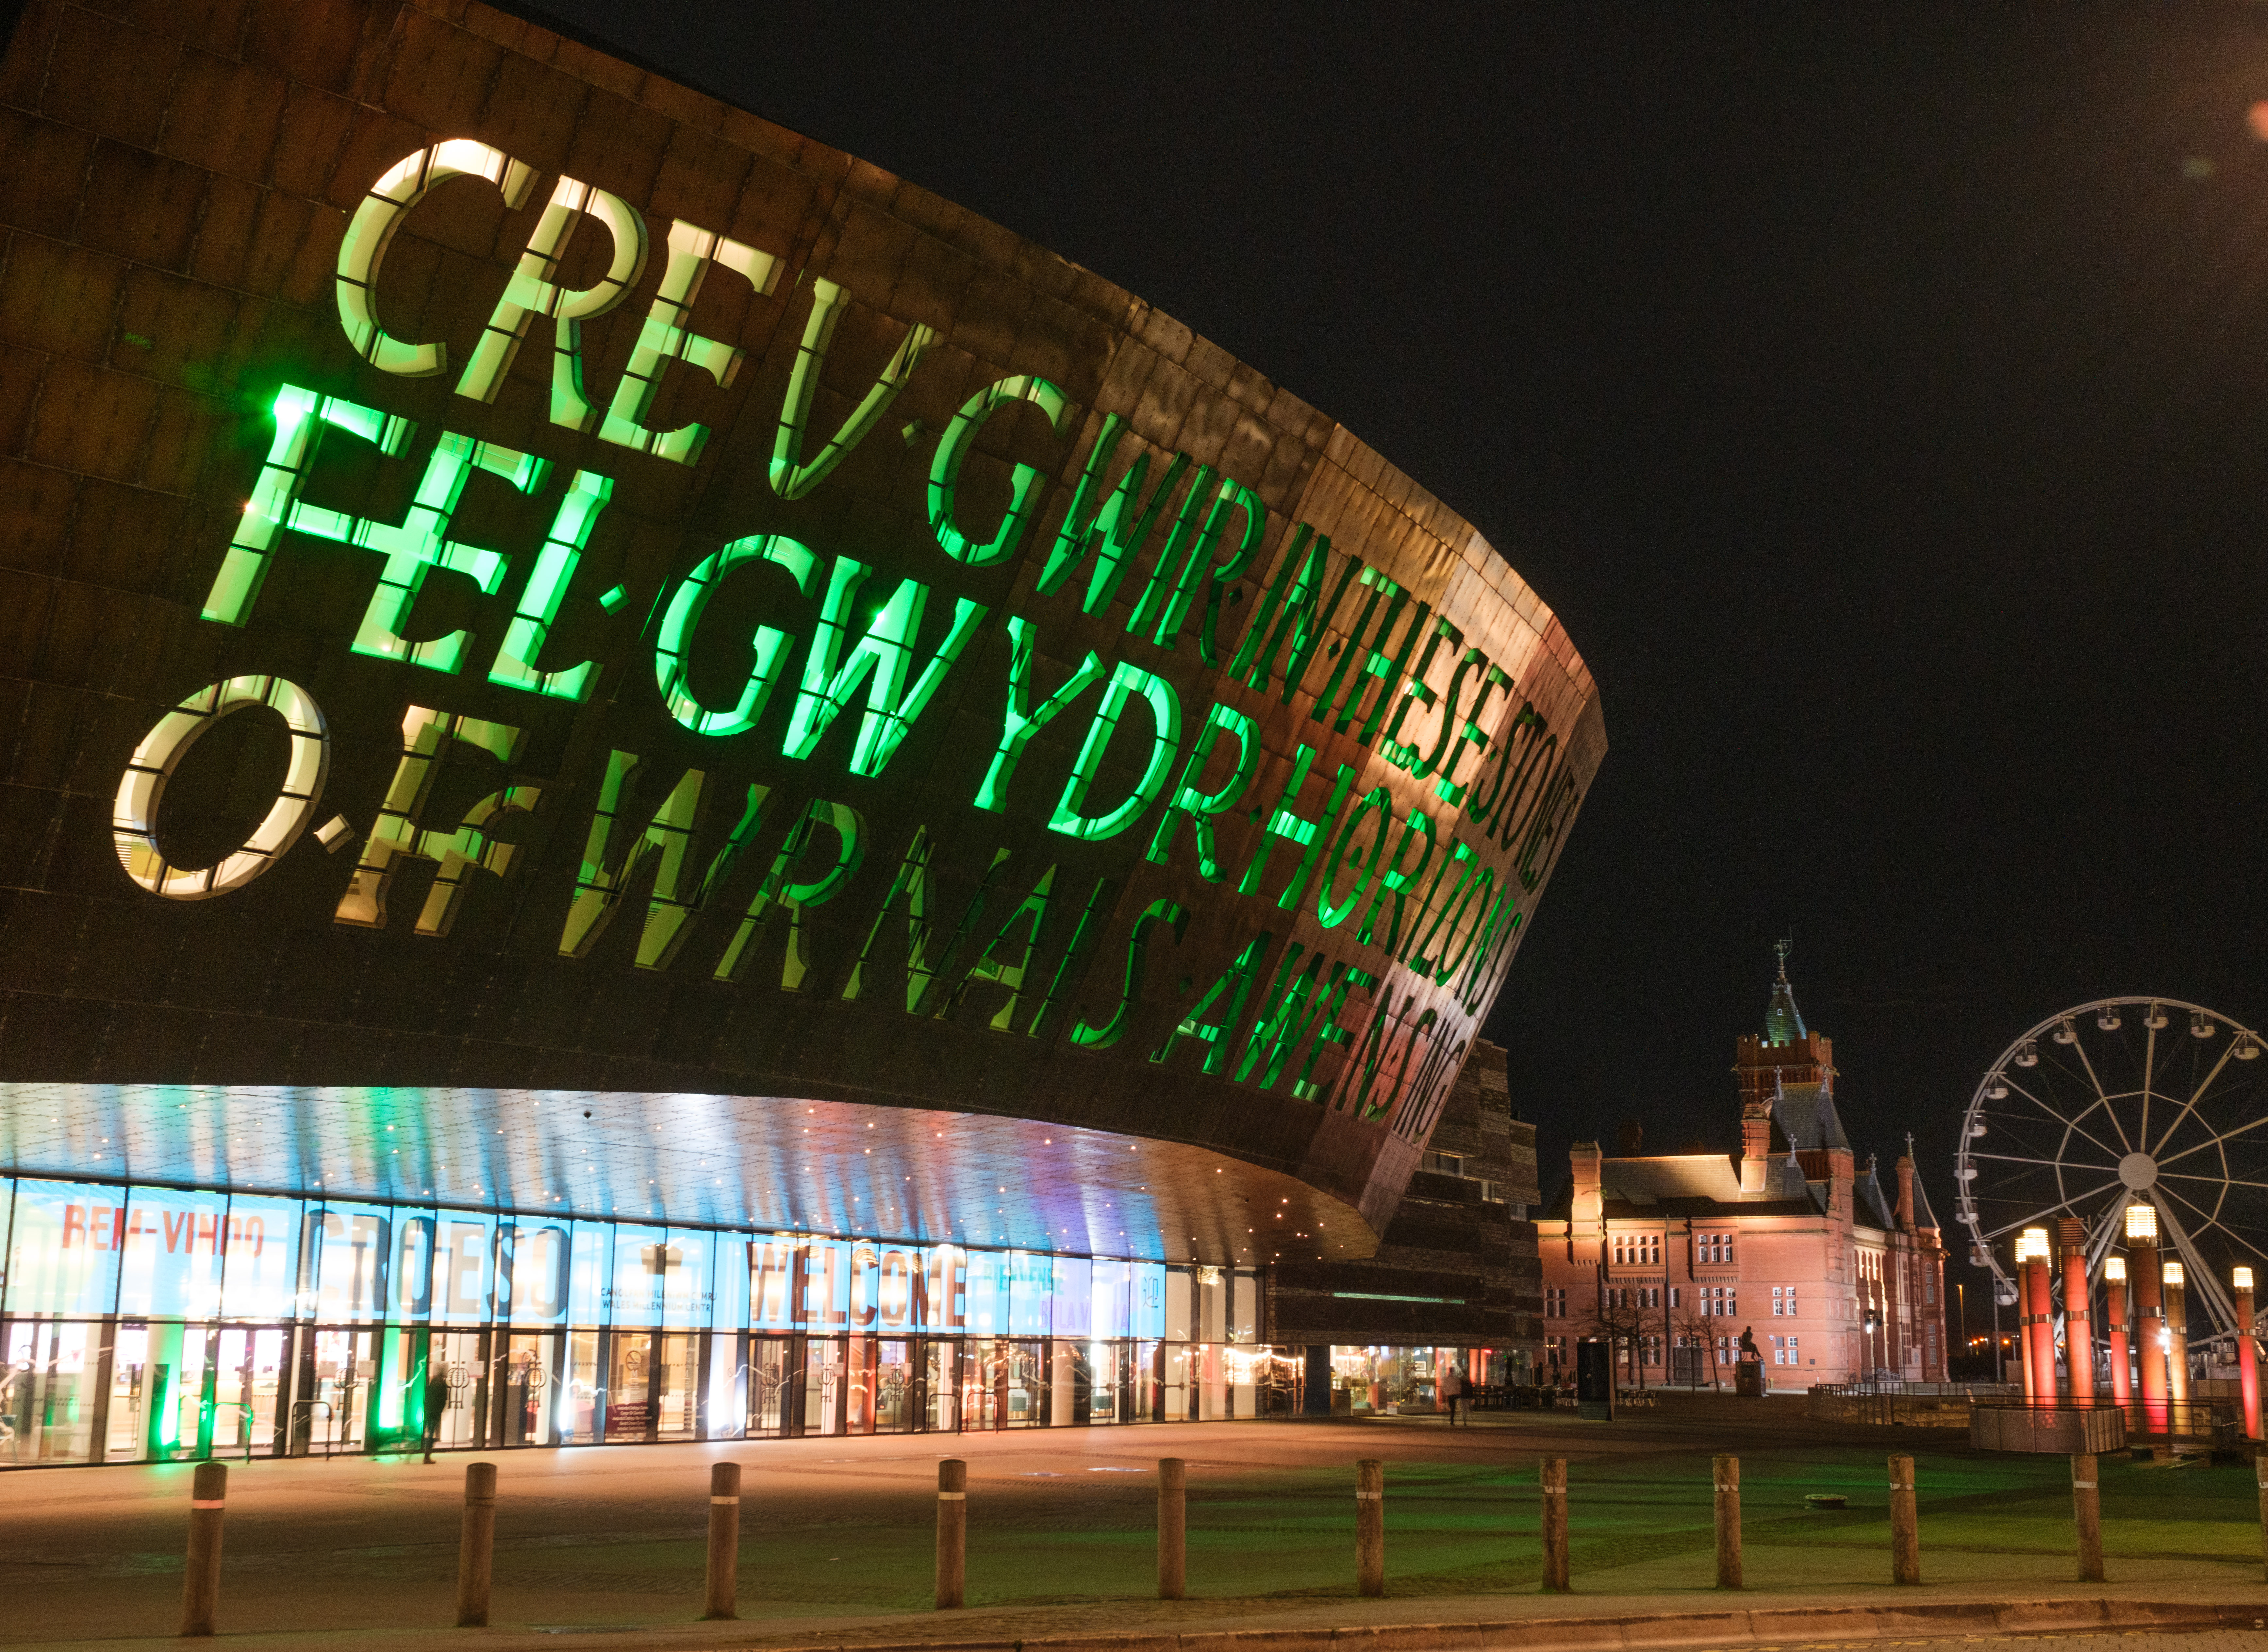 A color photograph of the front entrance to the Wales Millenium Center in Cardiff, UK.